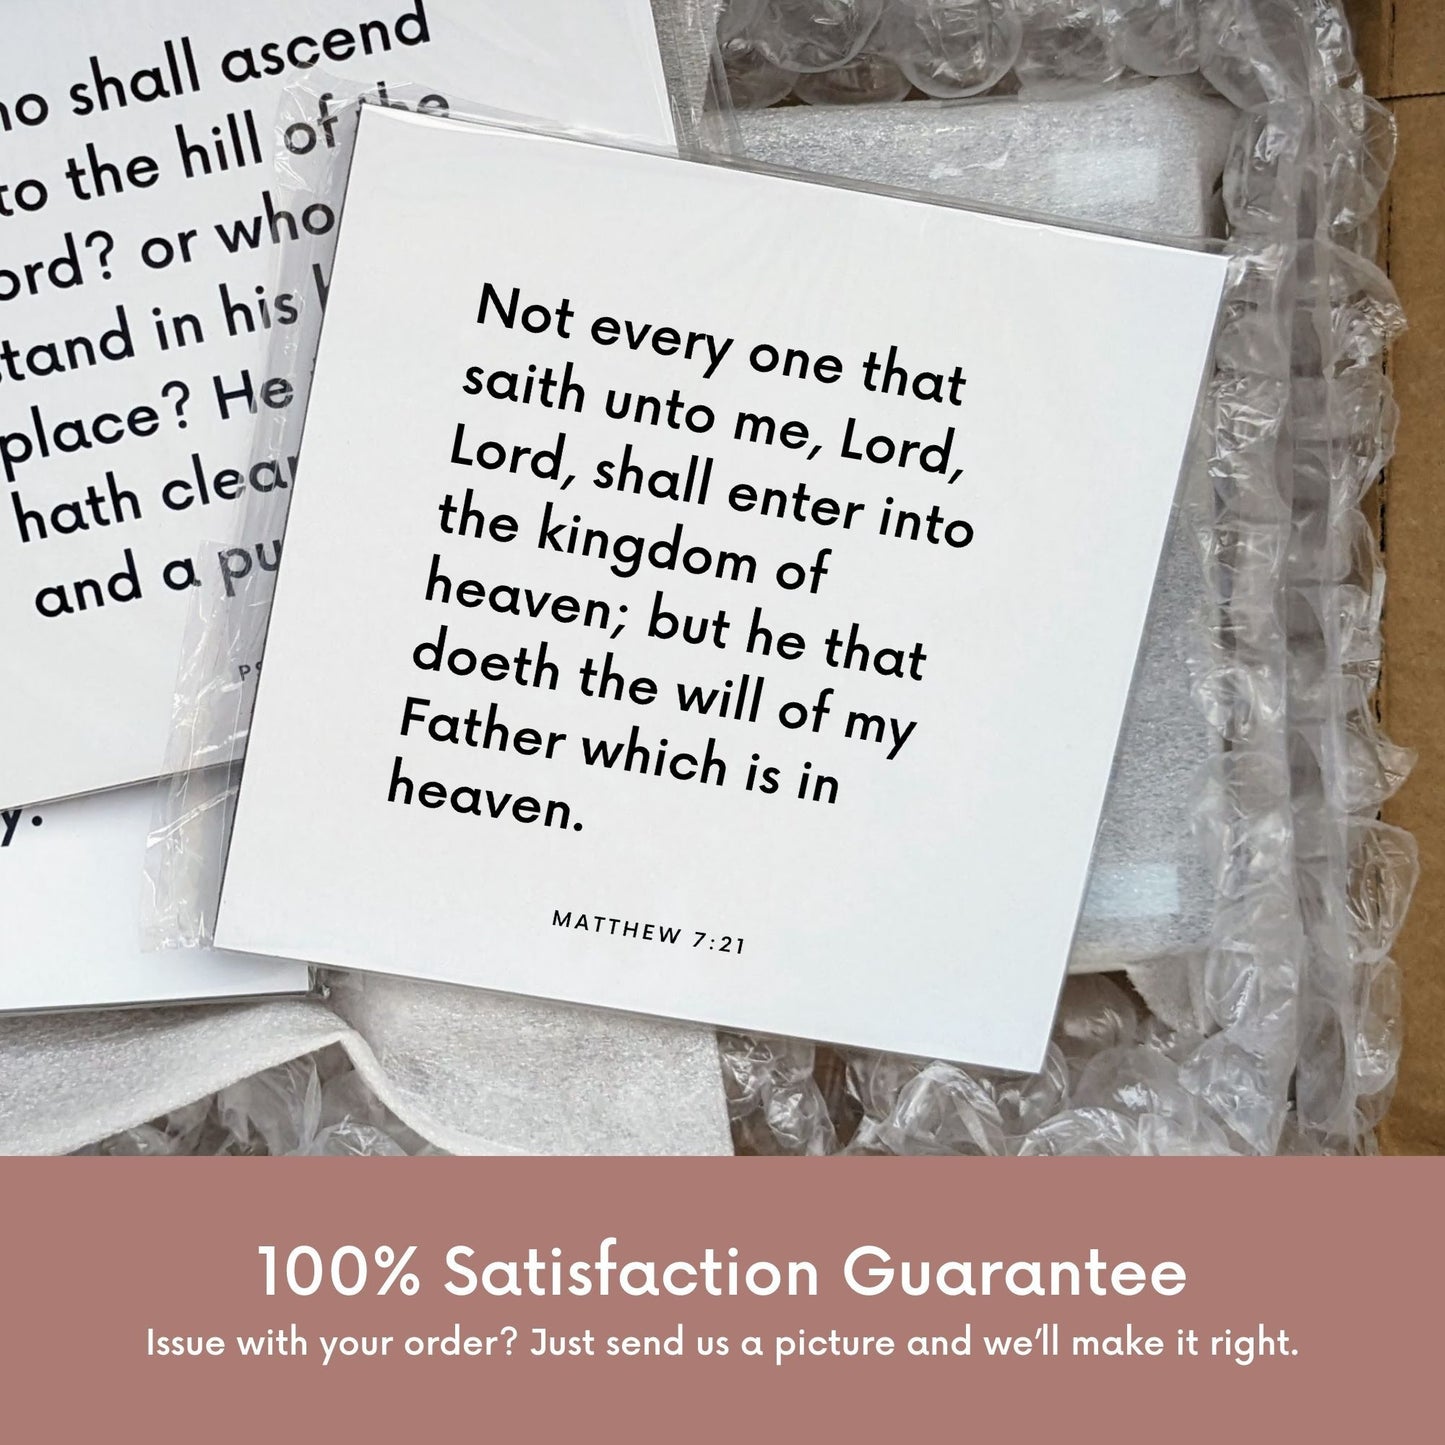 Shipping materials for scripture tile of Matthew 7:21 - "He that doeth the will of my Father which is in heaven"